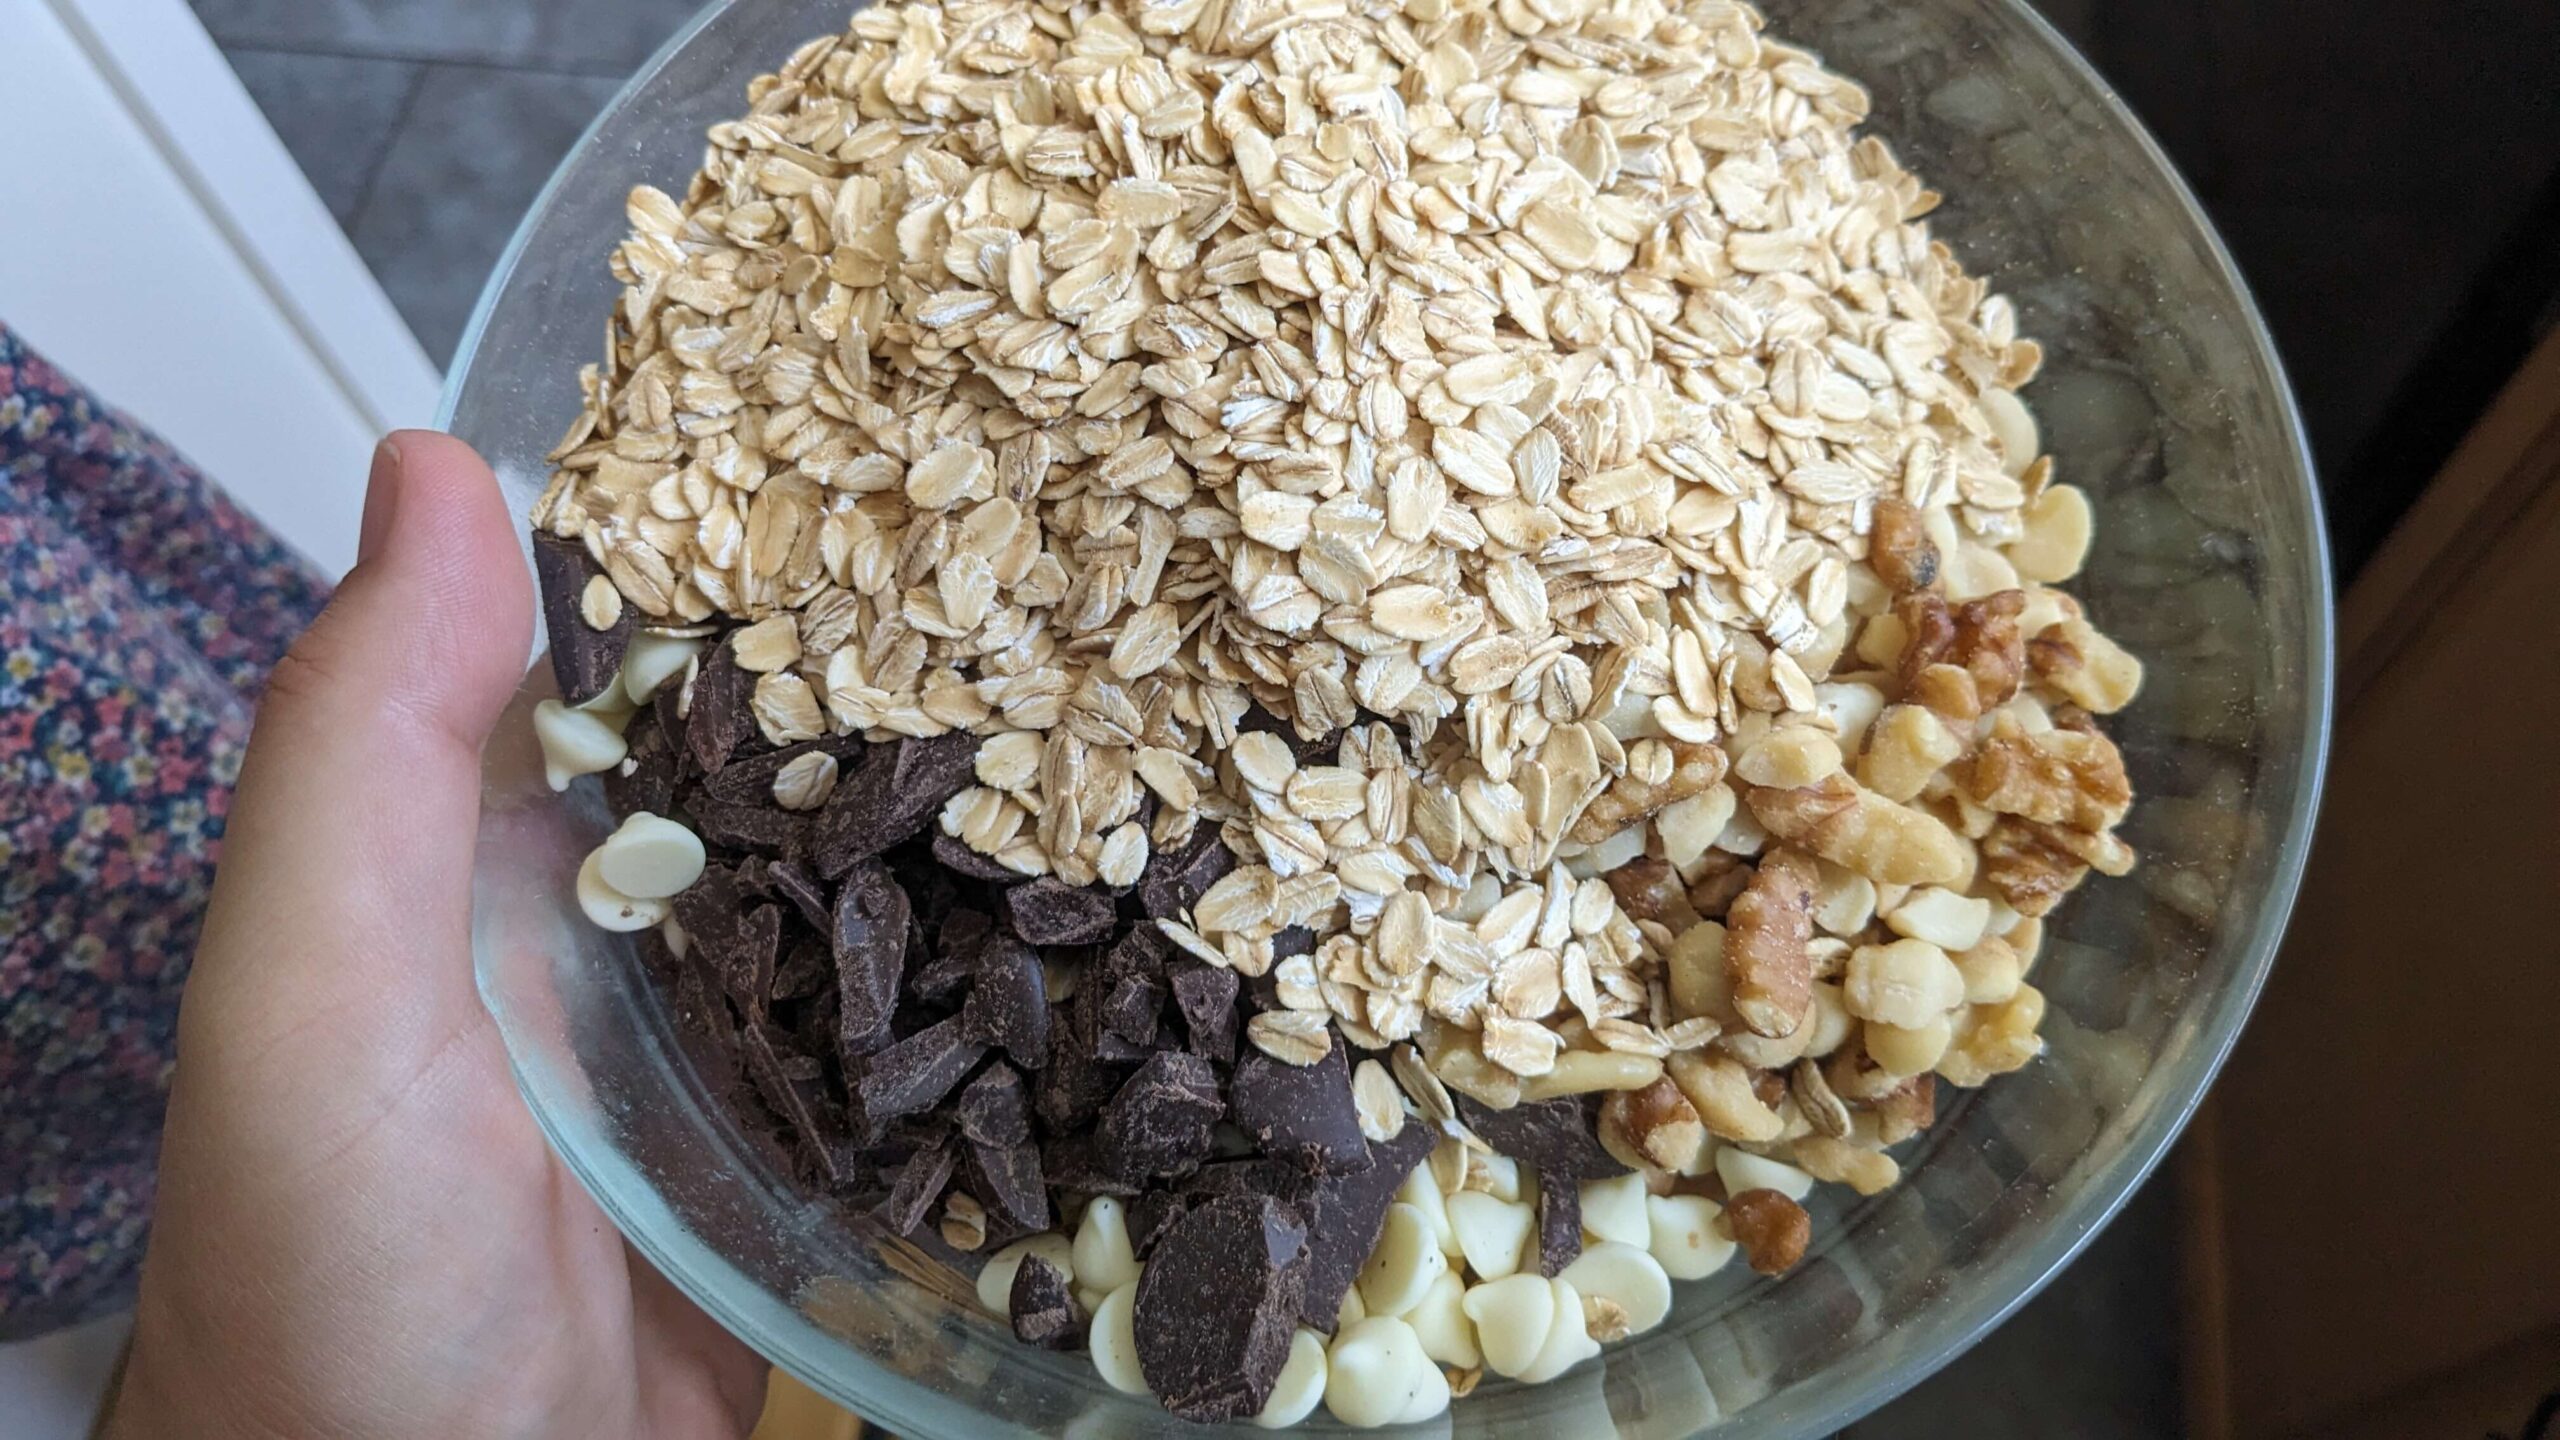 woman holding a bowl containing oats, chocolate chunks, walnuts, and white chocolate chips